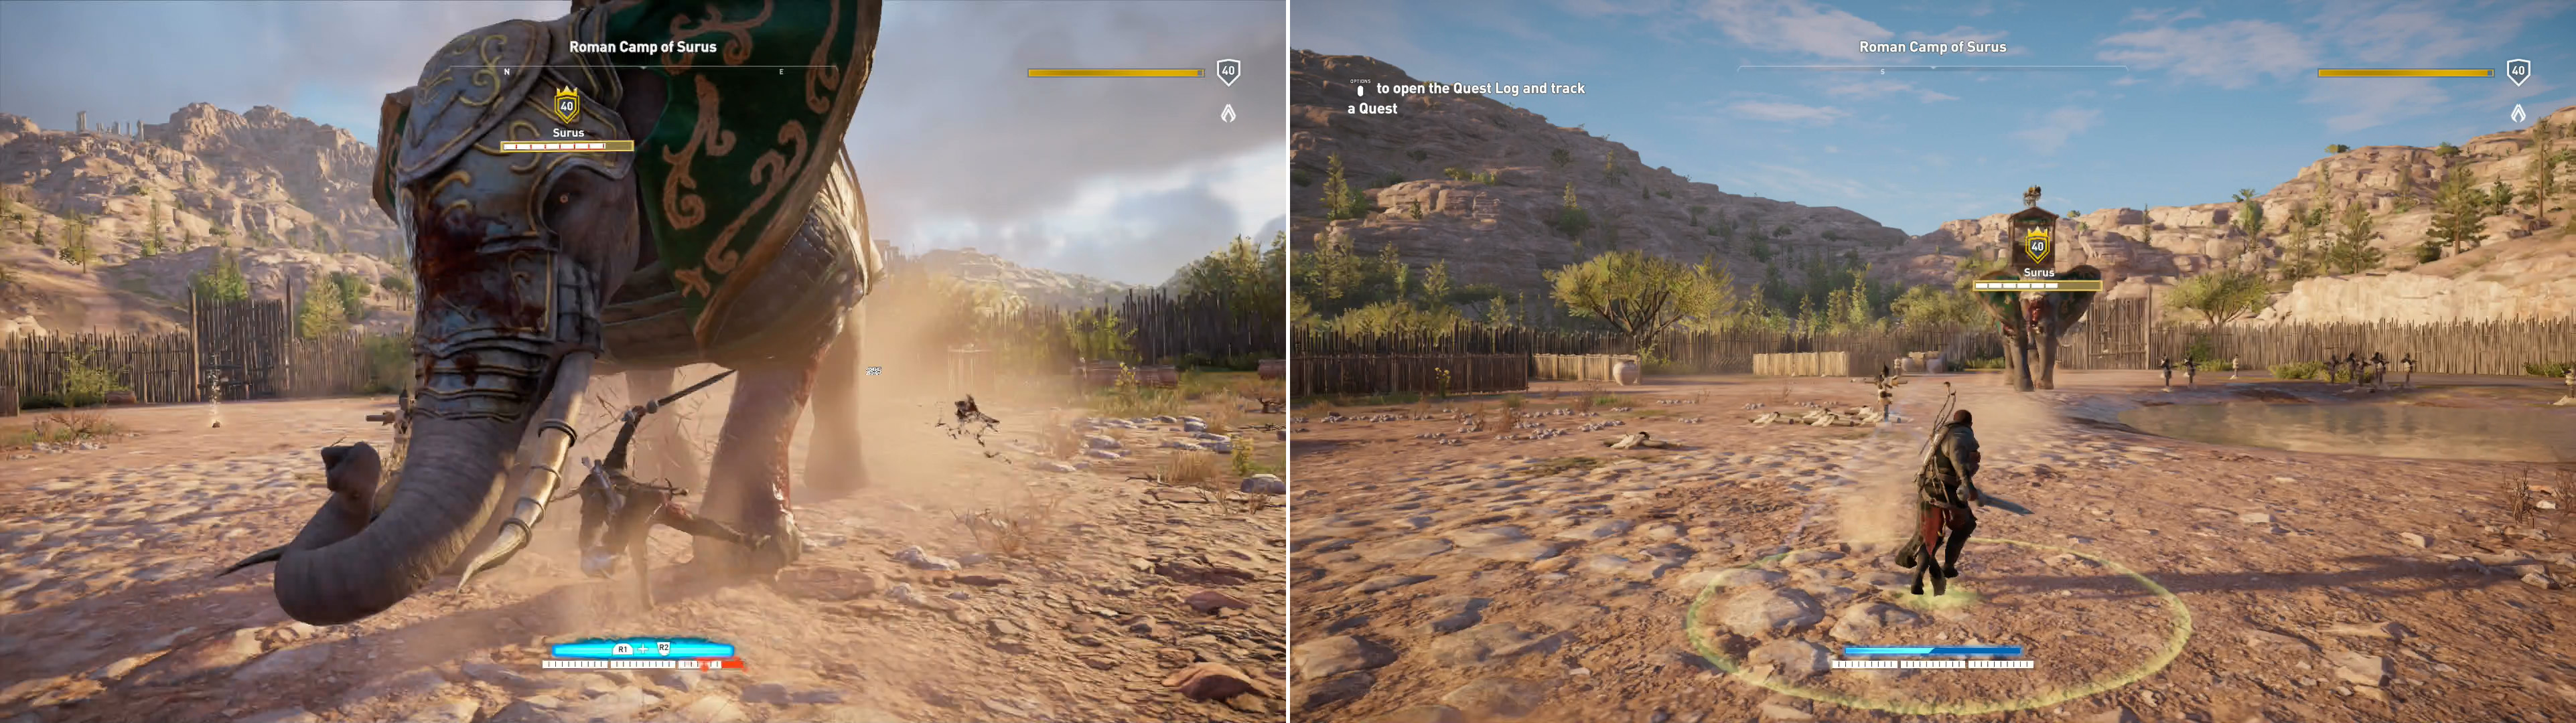 Surus is aggressive, and will prefer to attack in melee (left). This won't stop the soldiers riding in the elephant from throwing fire bombs at you, however (right).